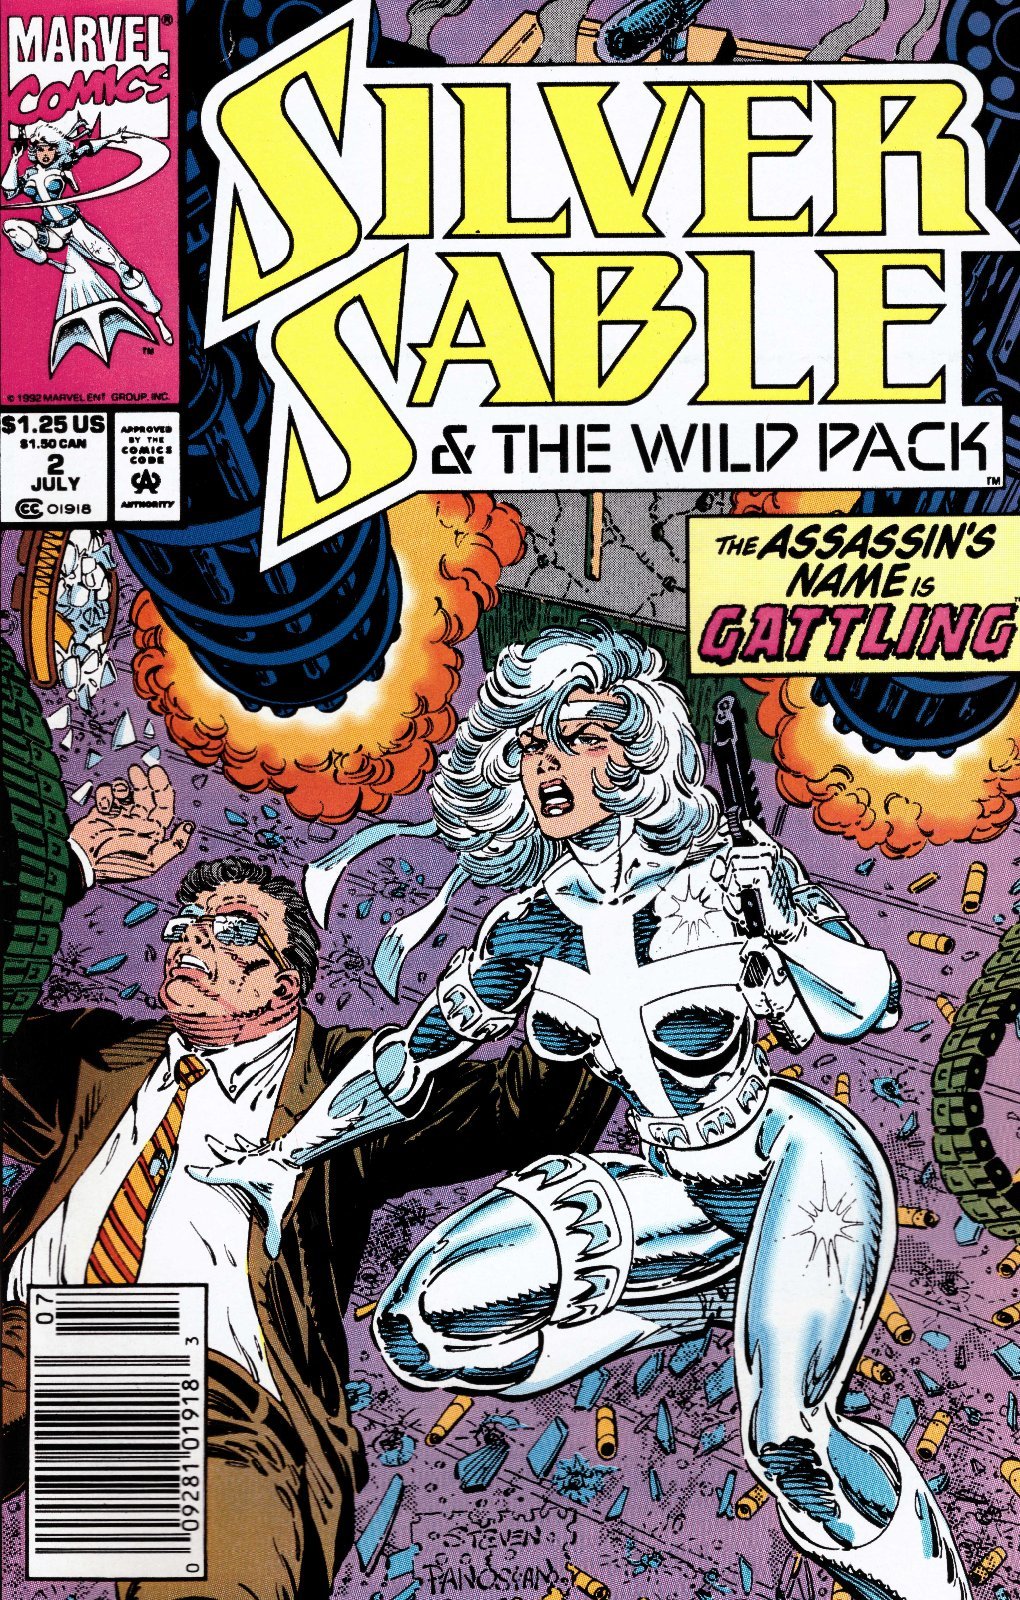 Silver Sable & The Wild Pack #2 Newsstand Cover (1992-1995) Marvel Comics